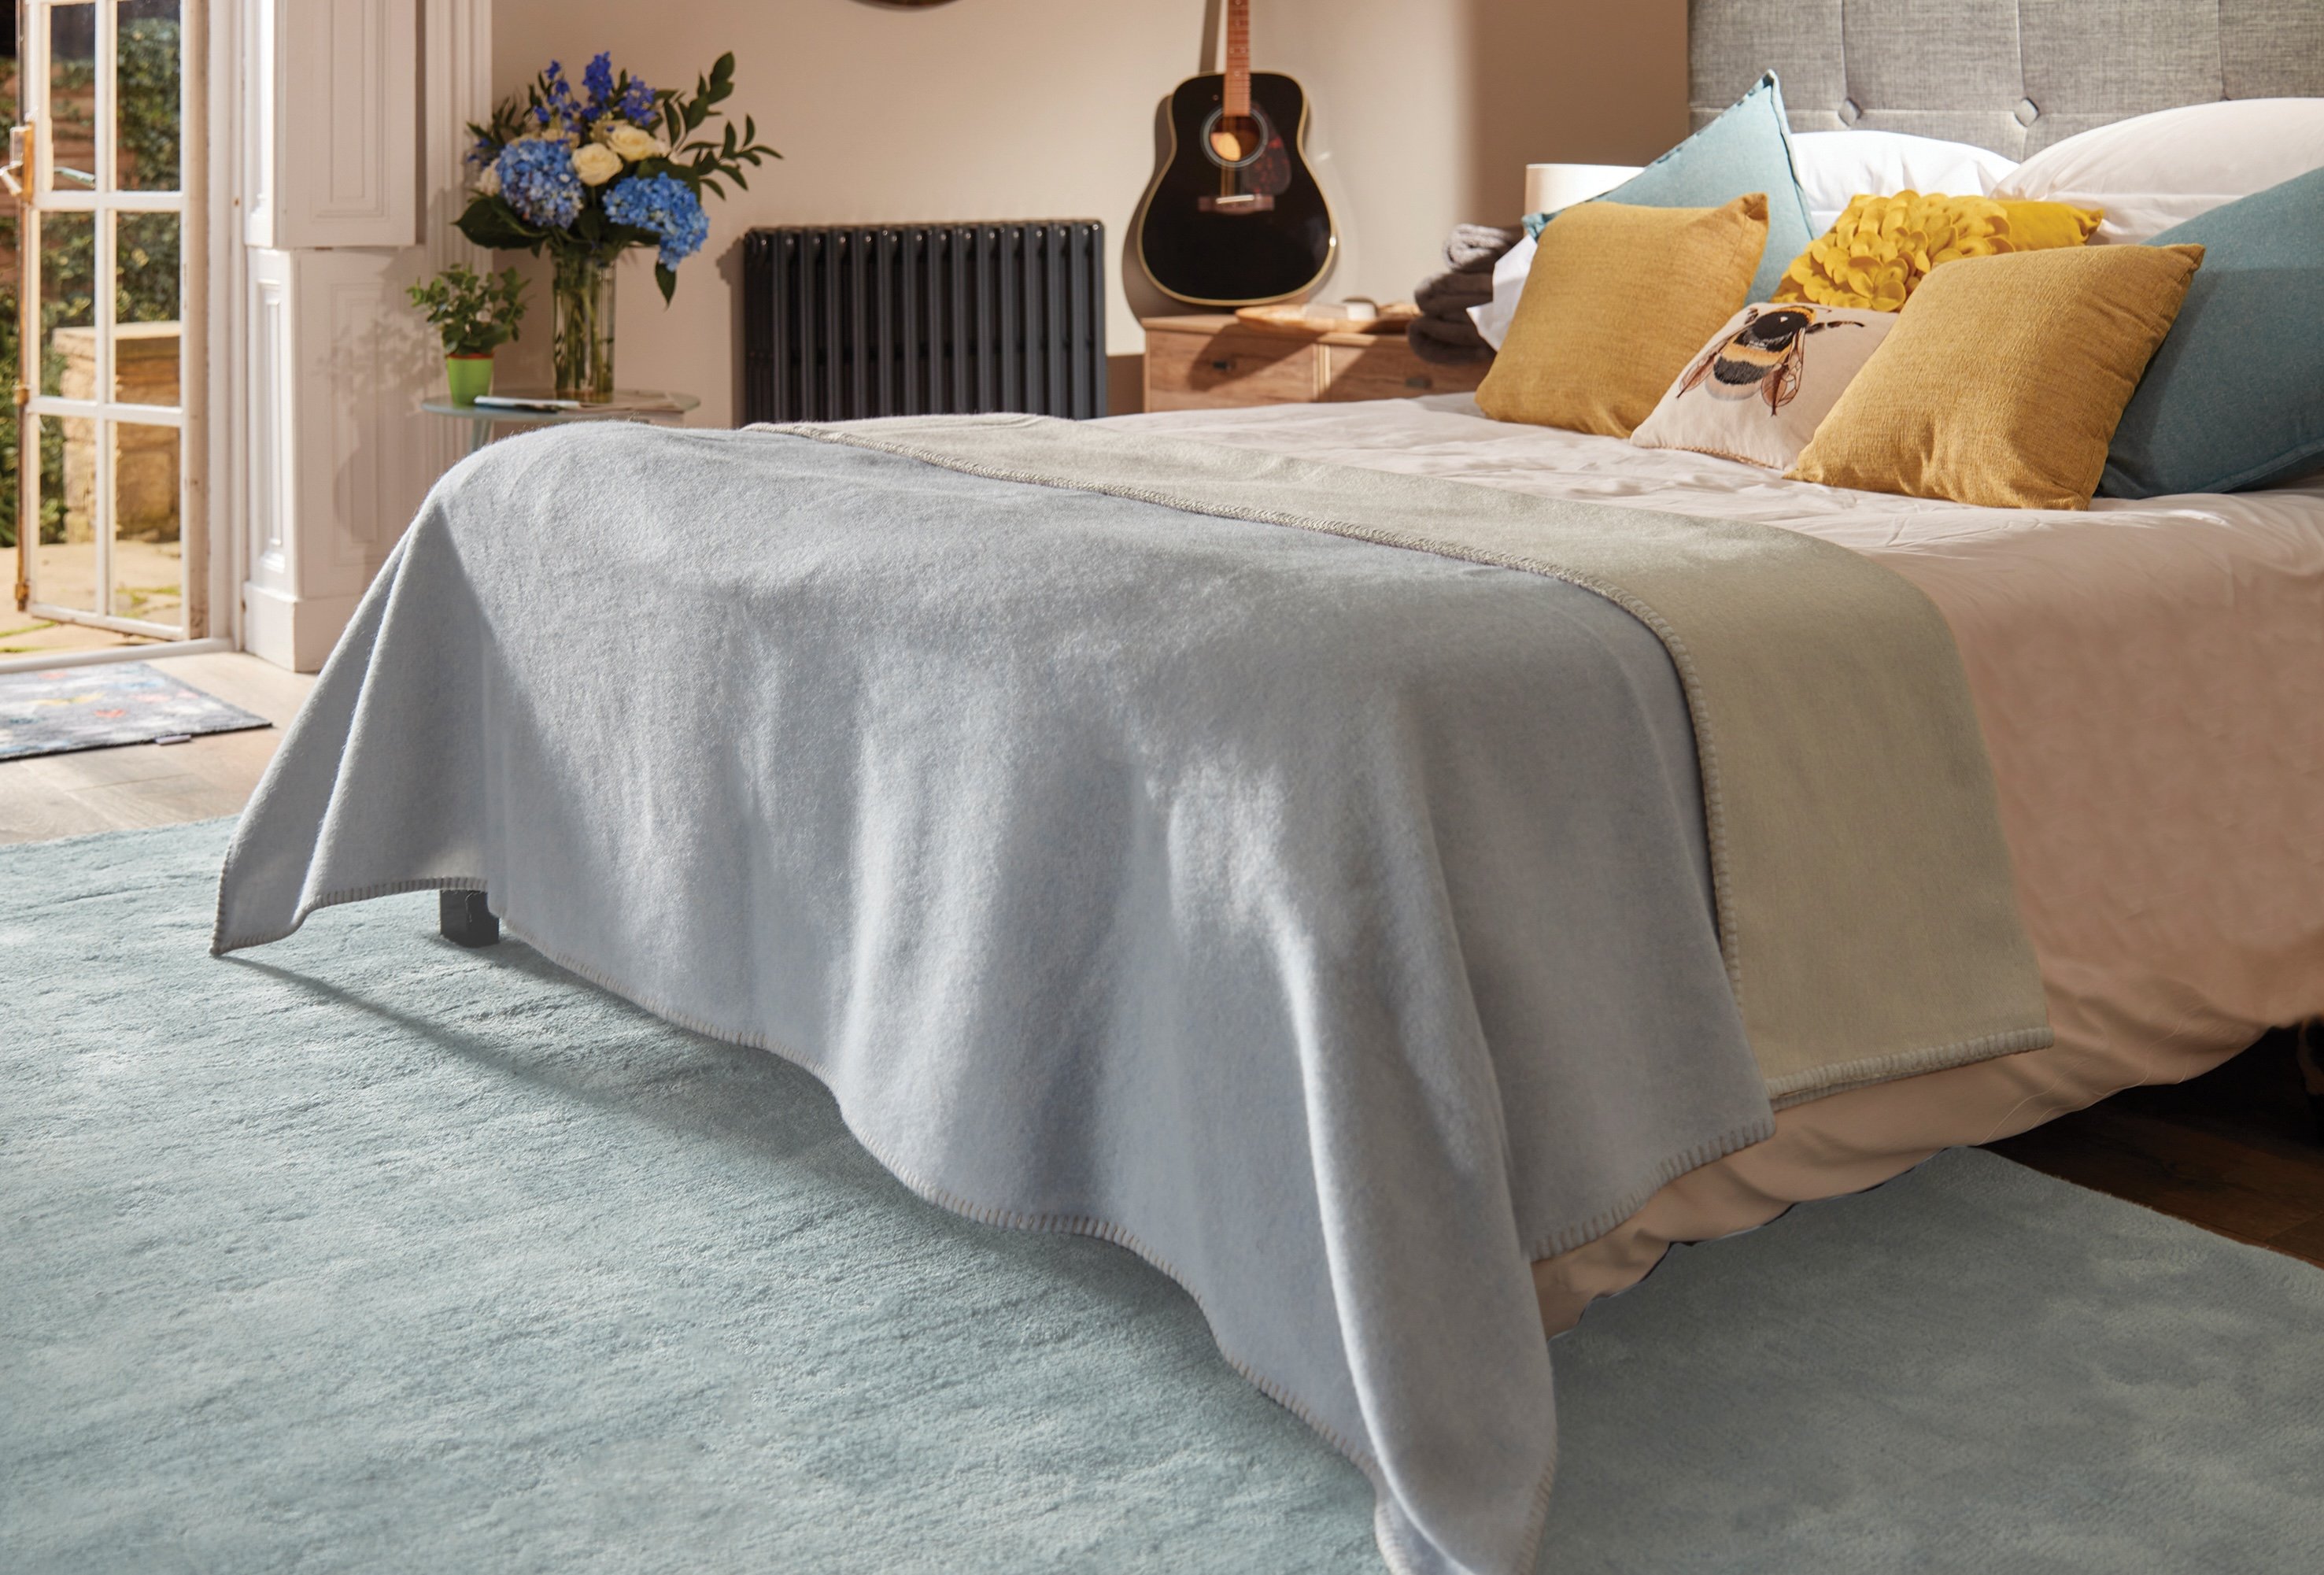 A bedroom with a large blue rug under a bed